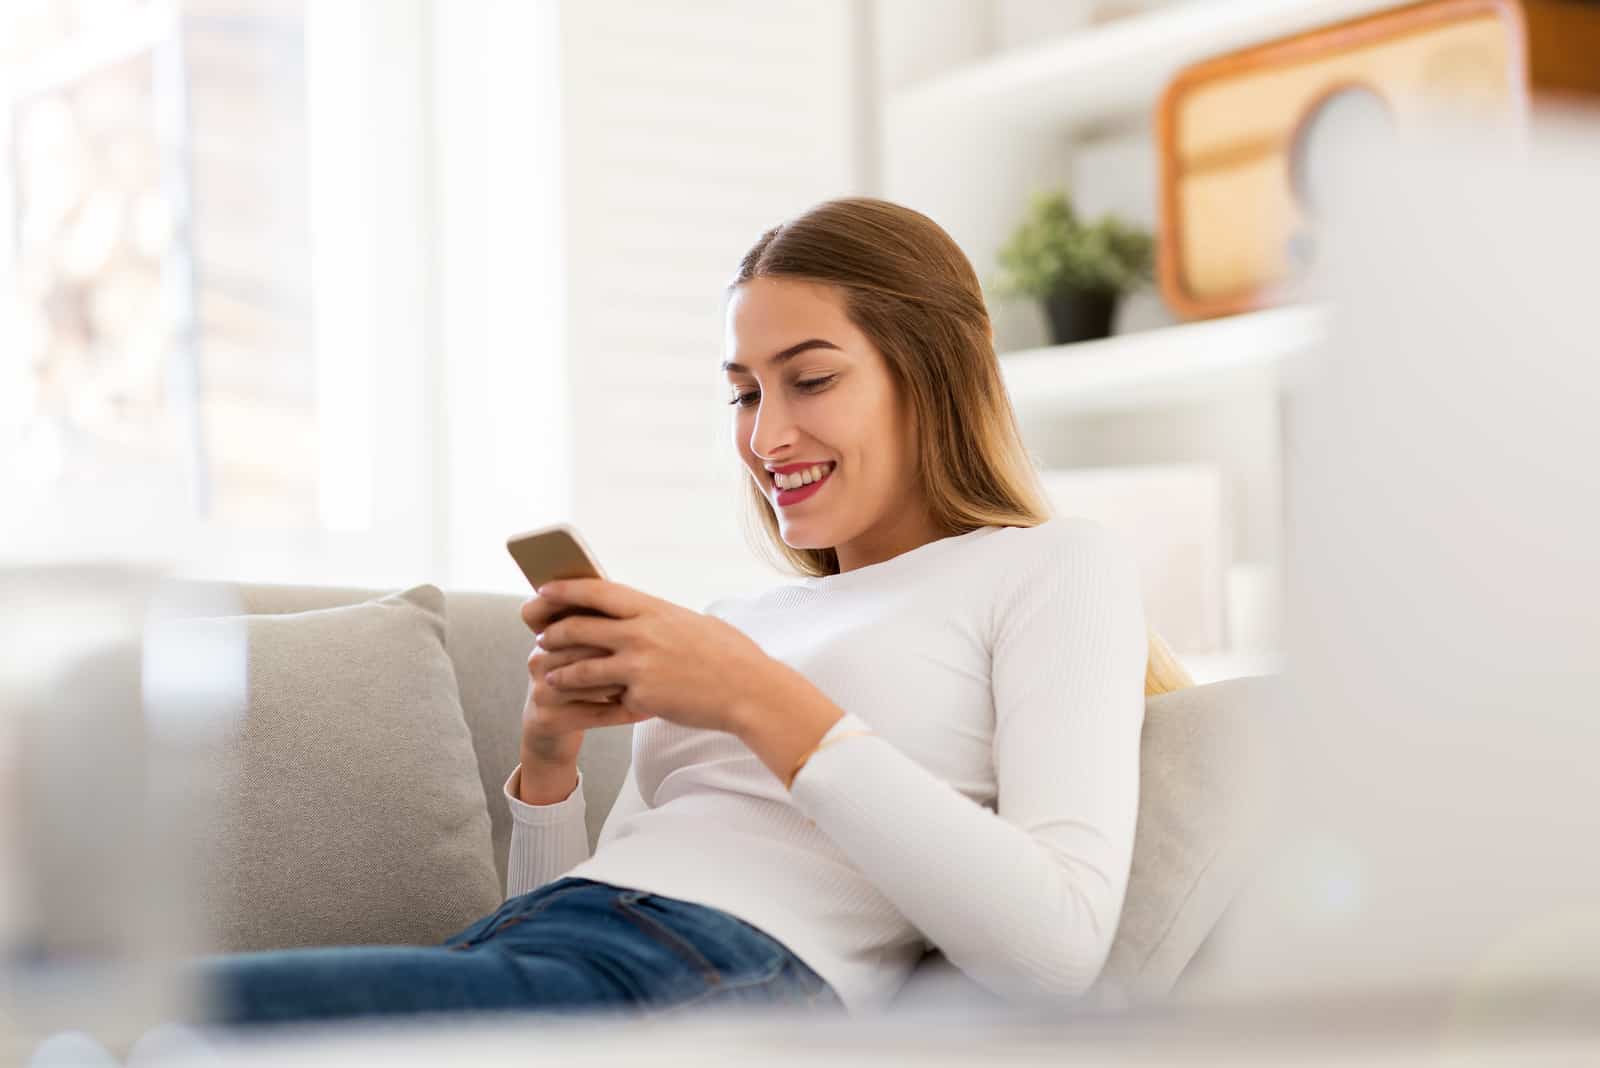 young woman in white shirtsitting on sofa looking at her phone